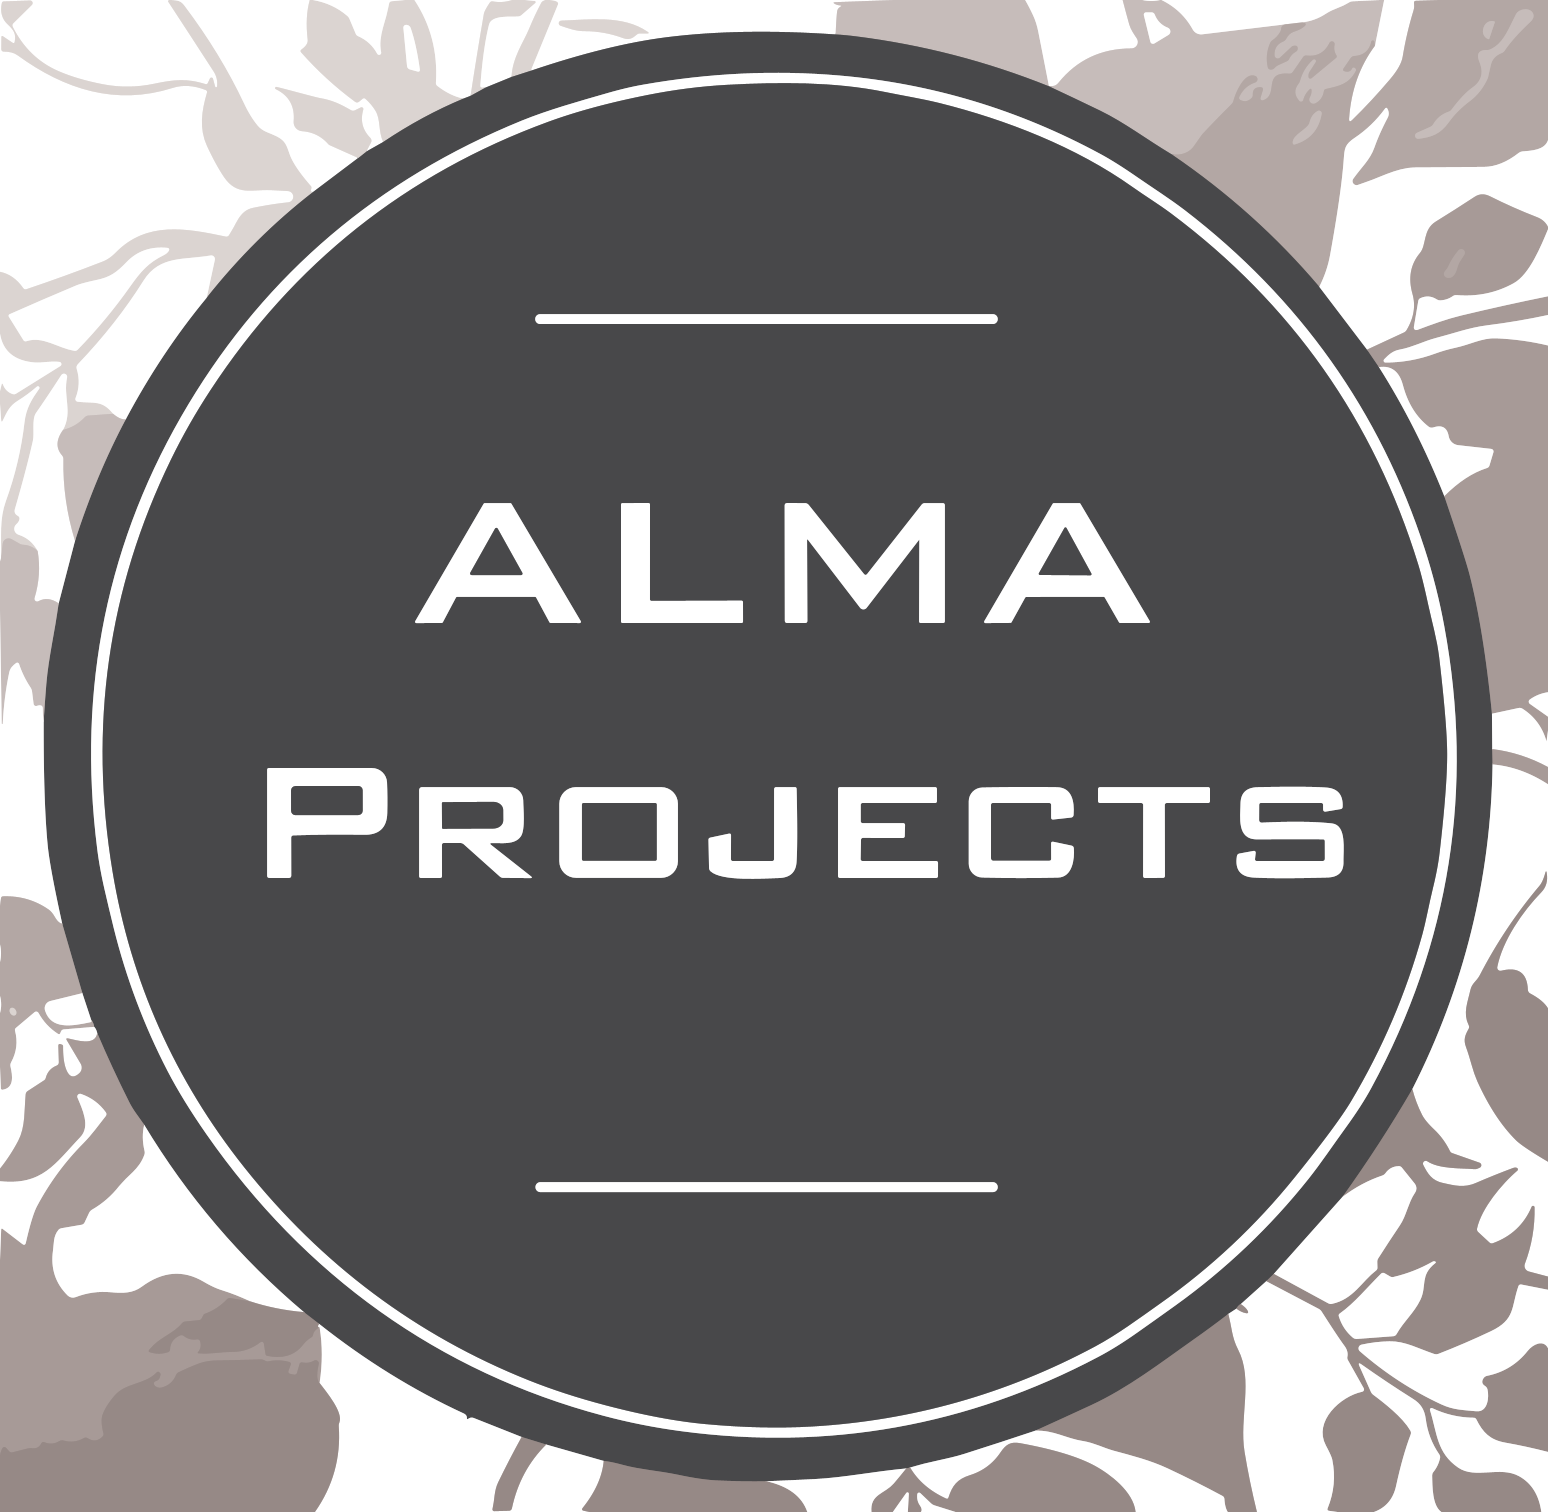 ALMA PROJECTS